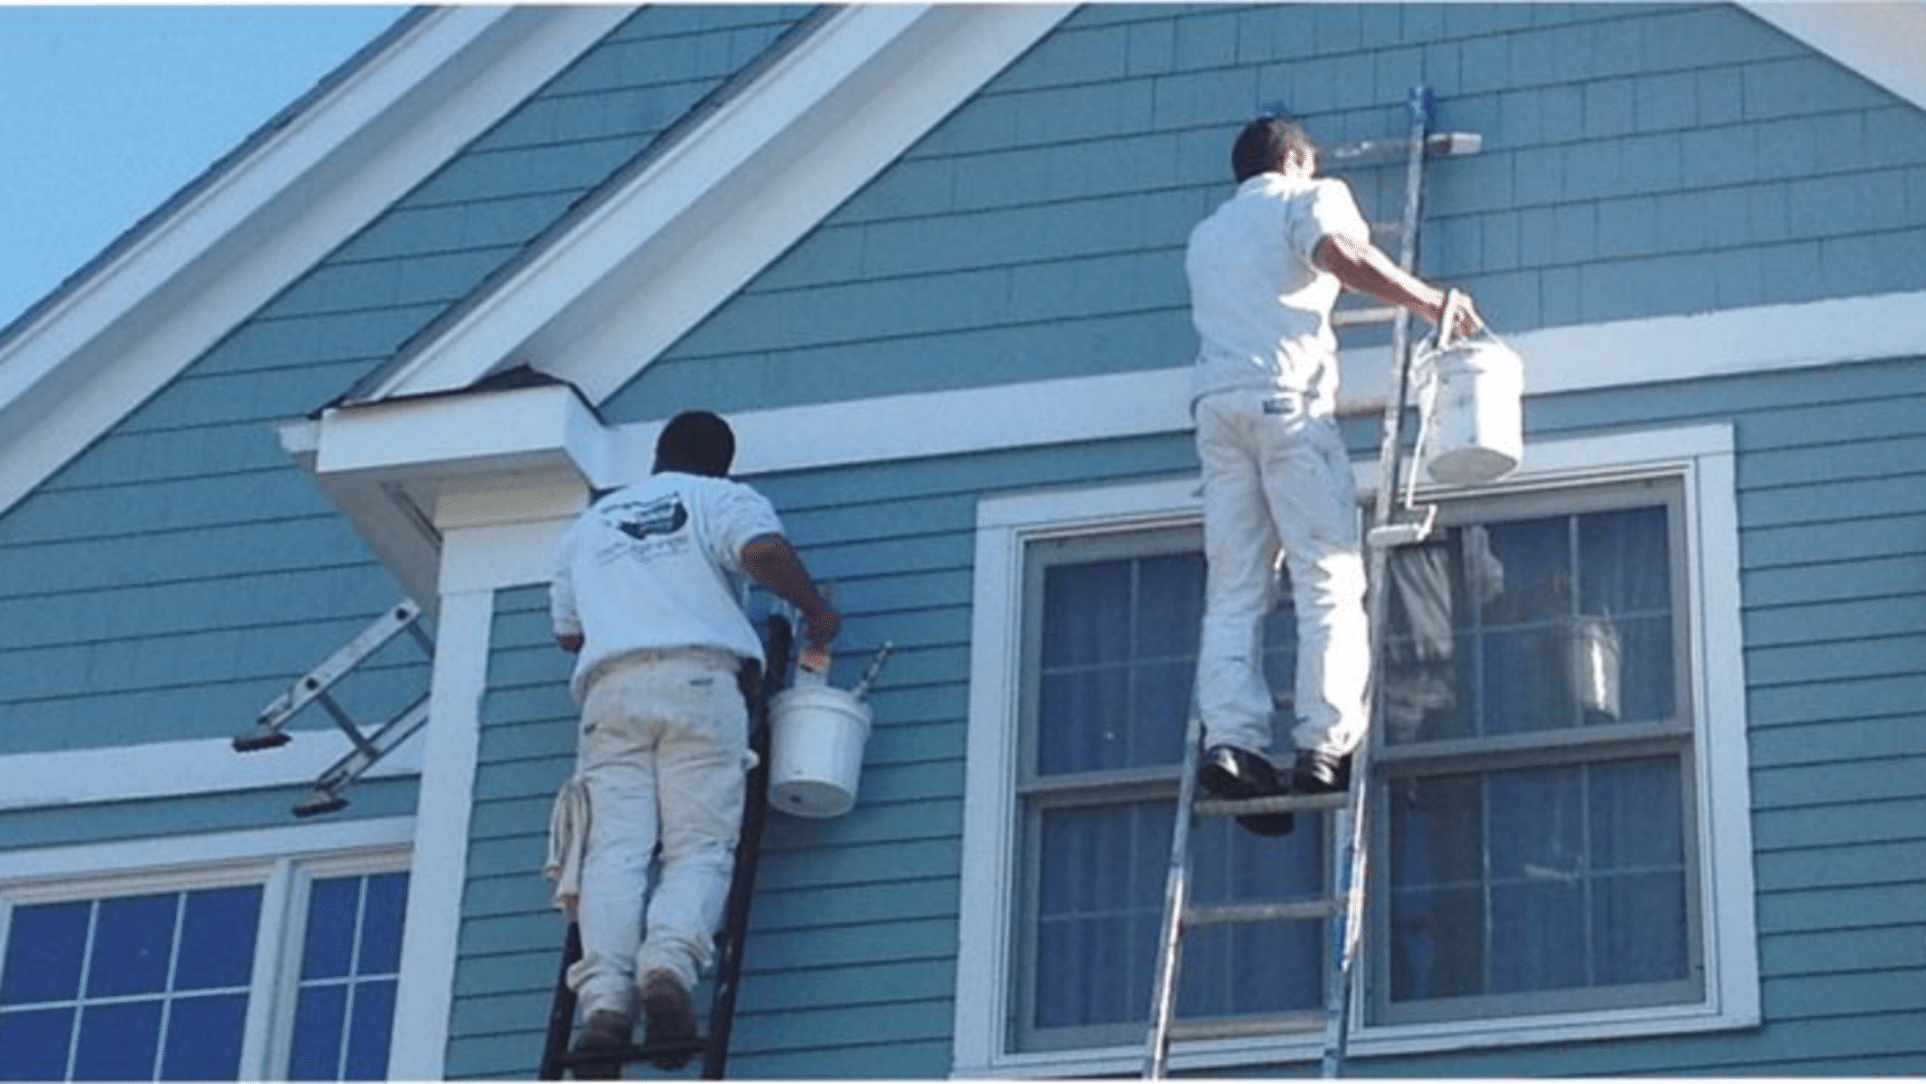 Stanford Painters painting exterior home on ladders